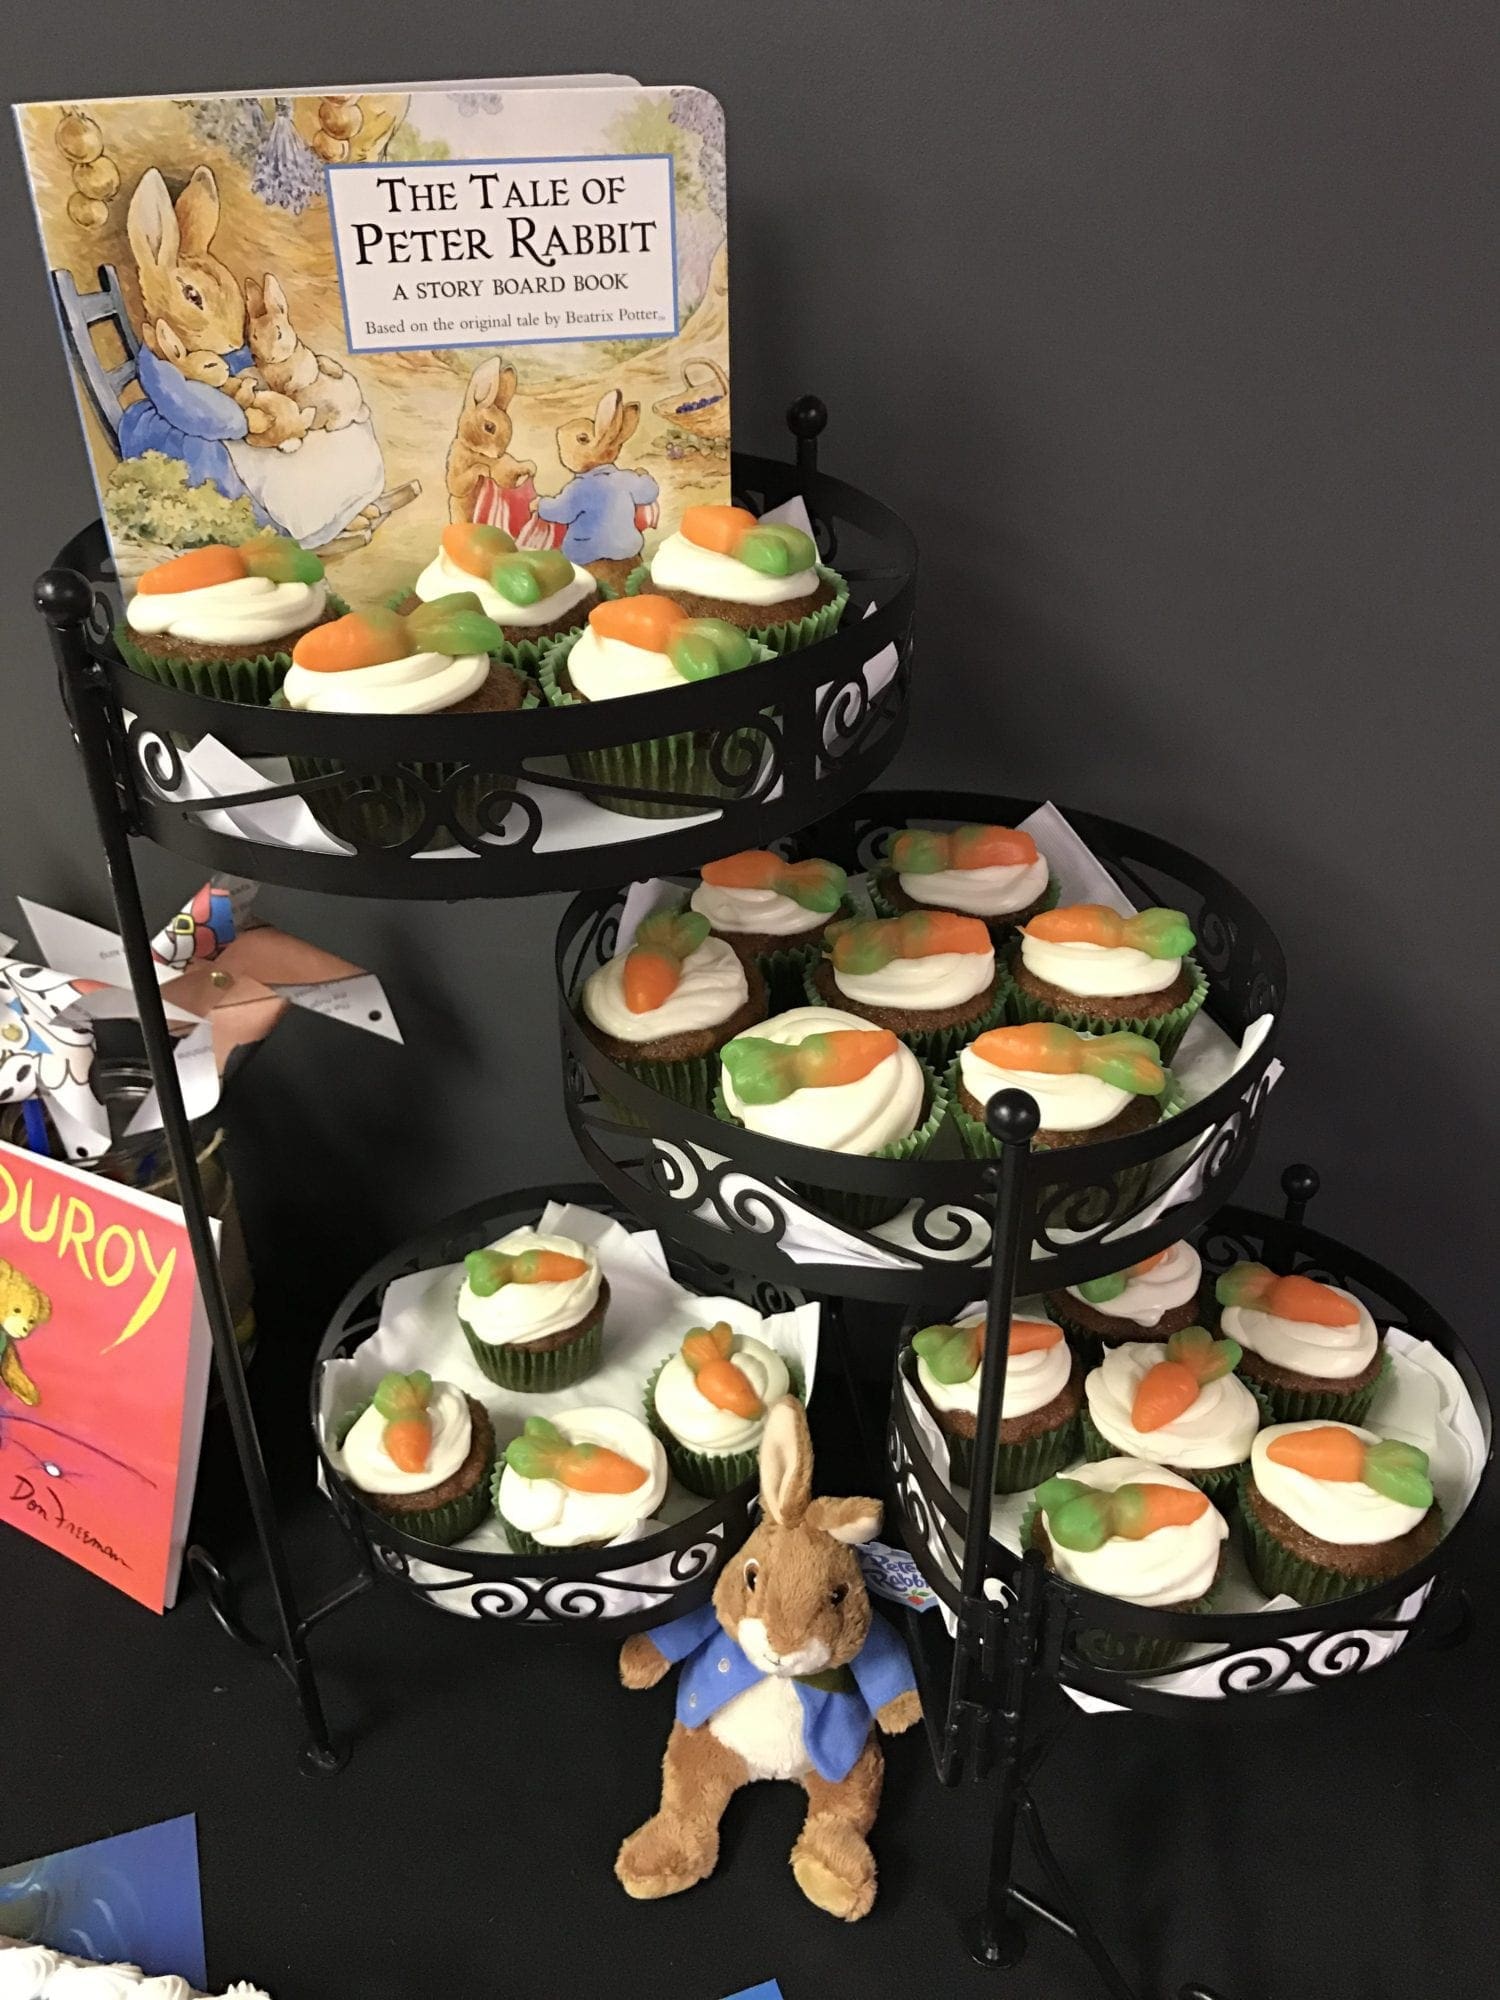 snack idea to go with The Tale of Peter Rabbit book